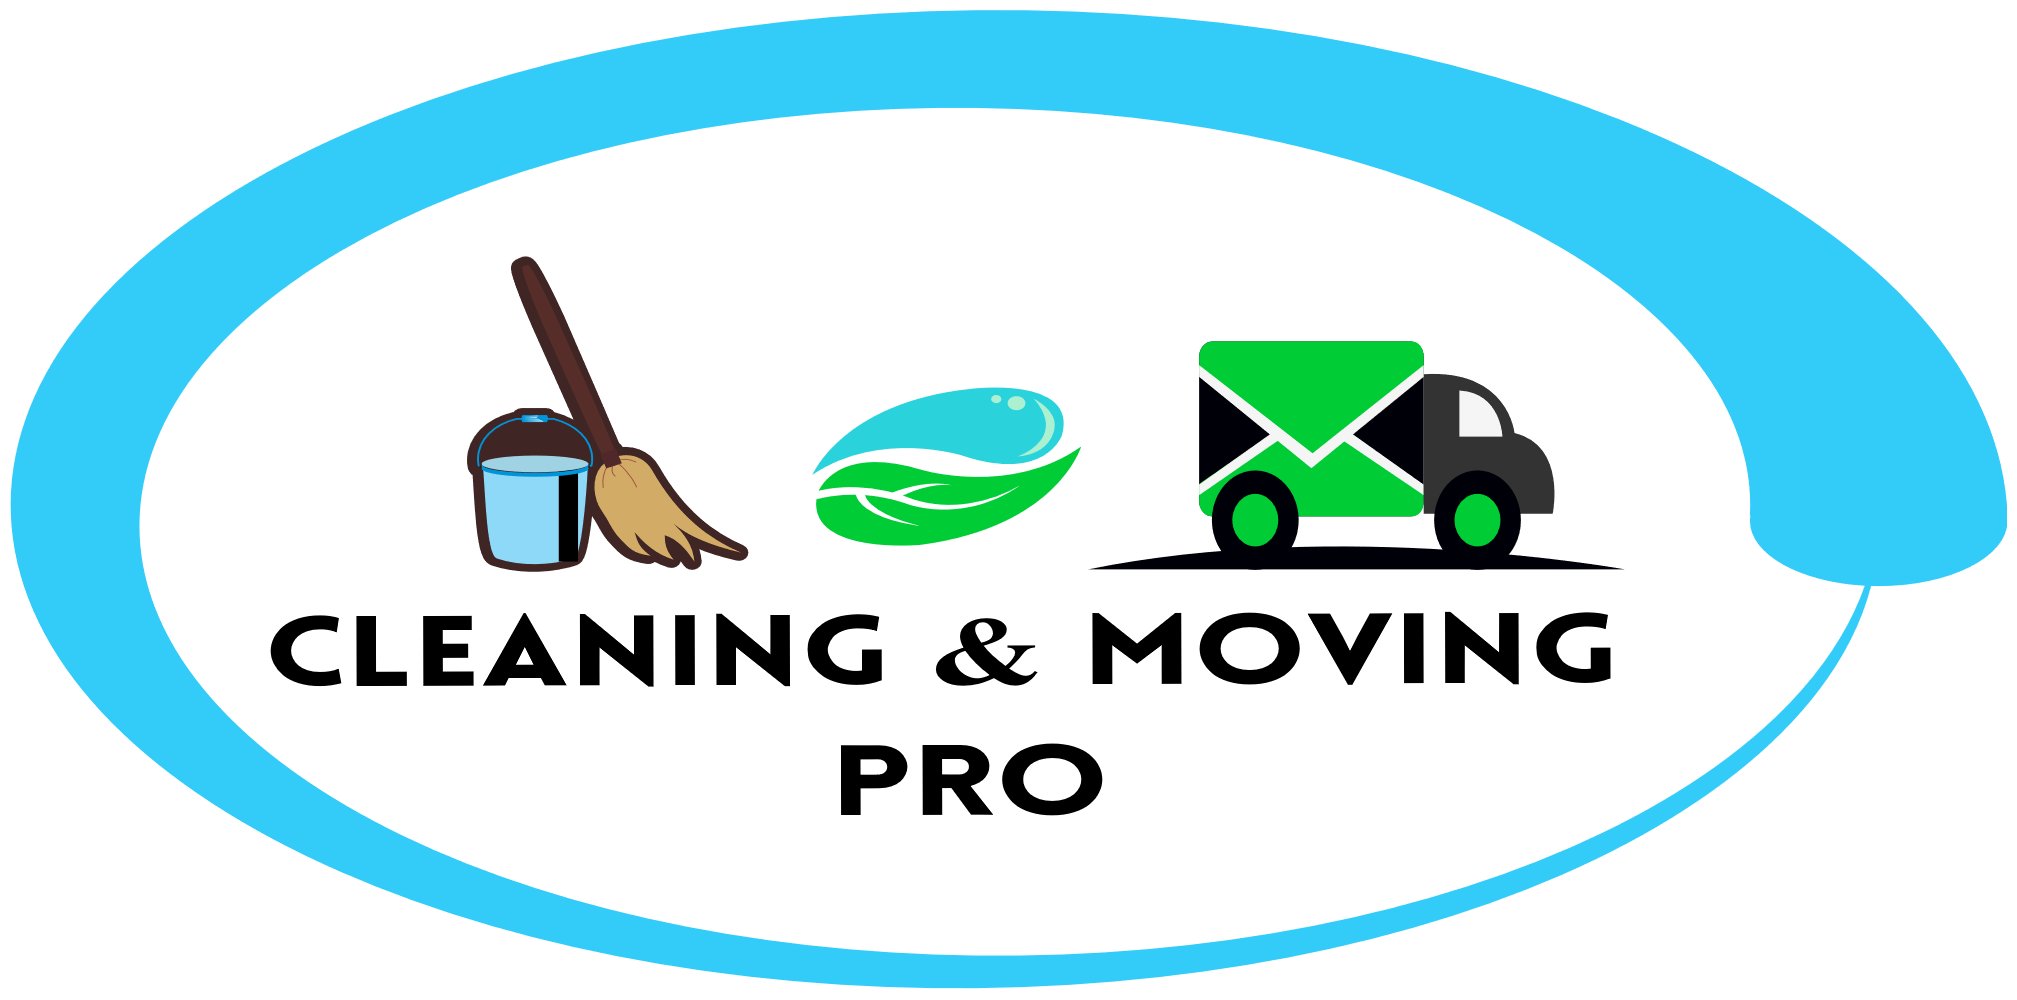 Support Services Galway / Dublin. We operate locally and nationwide on both domestic and commercial sites.-CLEANING AND MOVING PRO